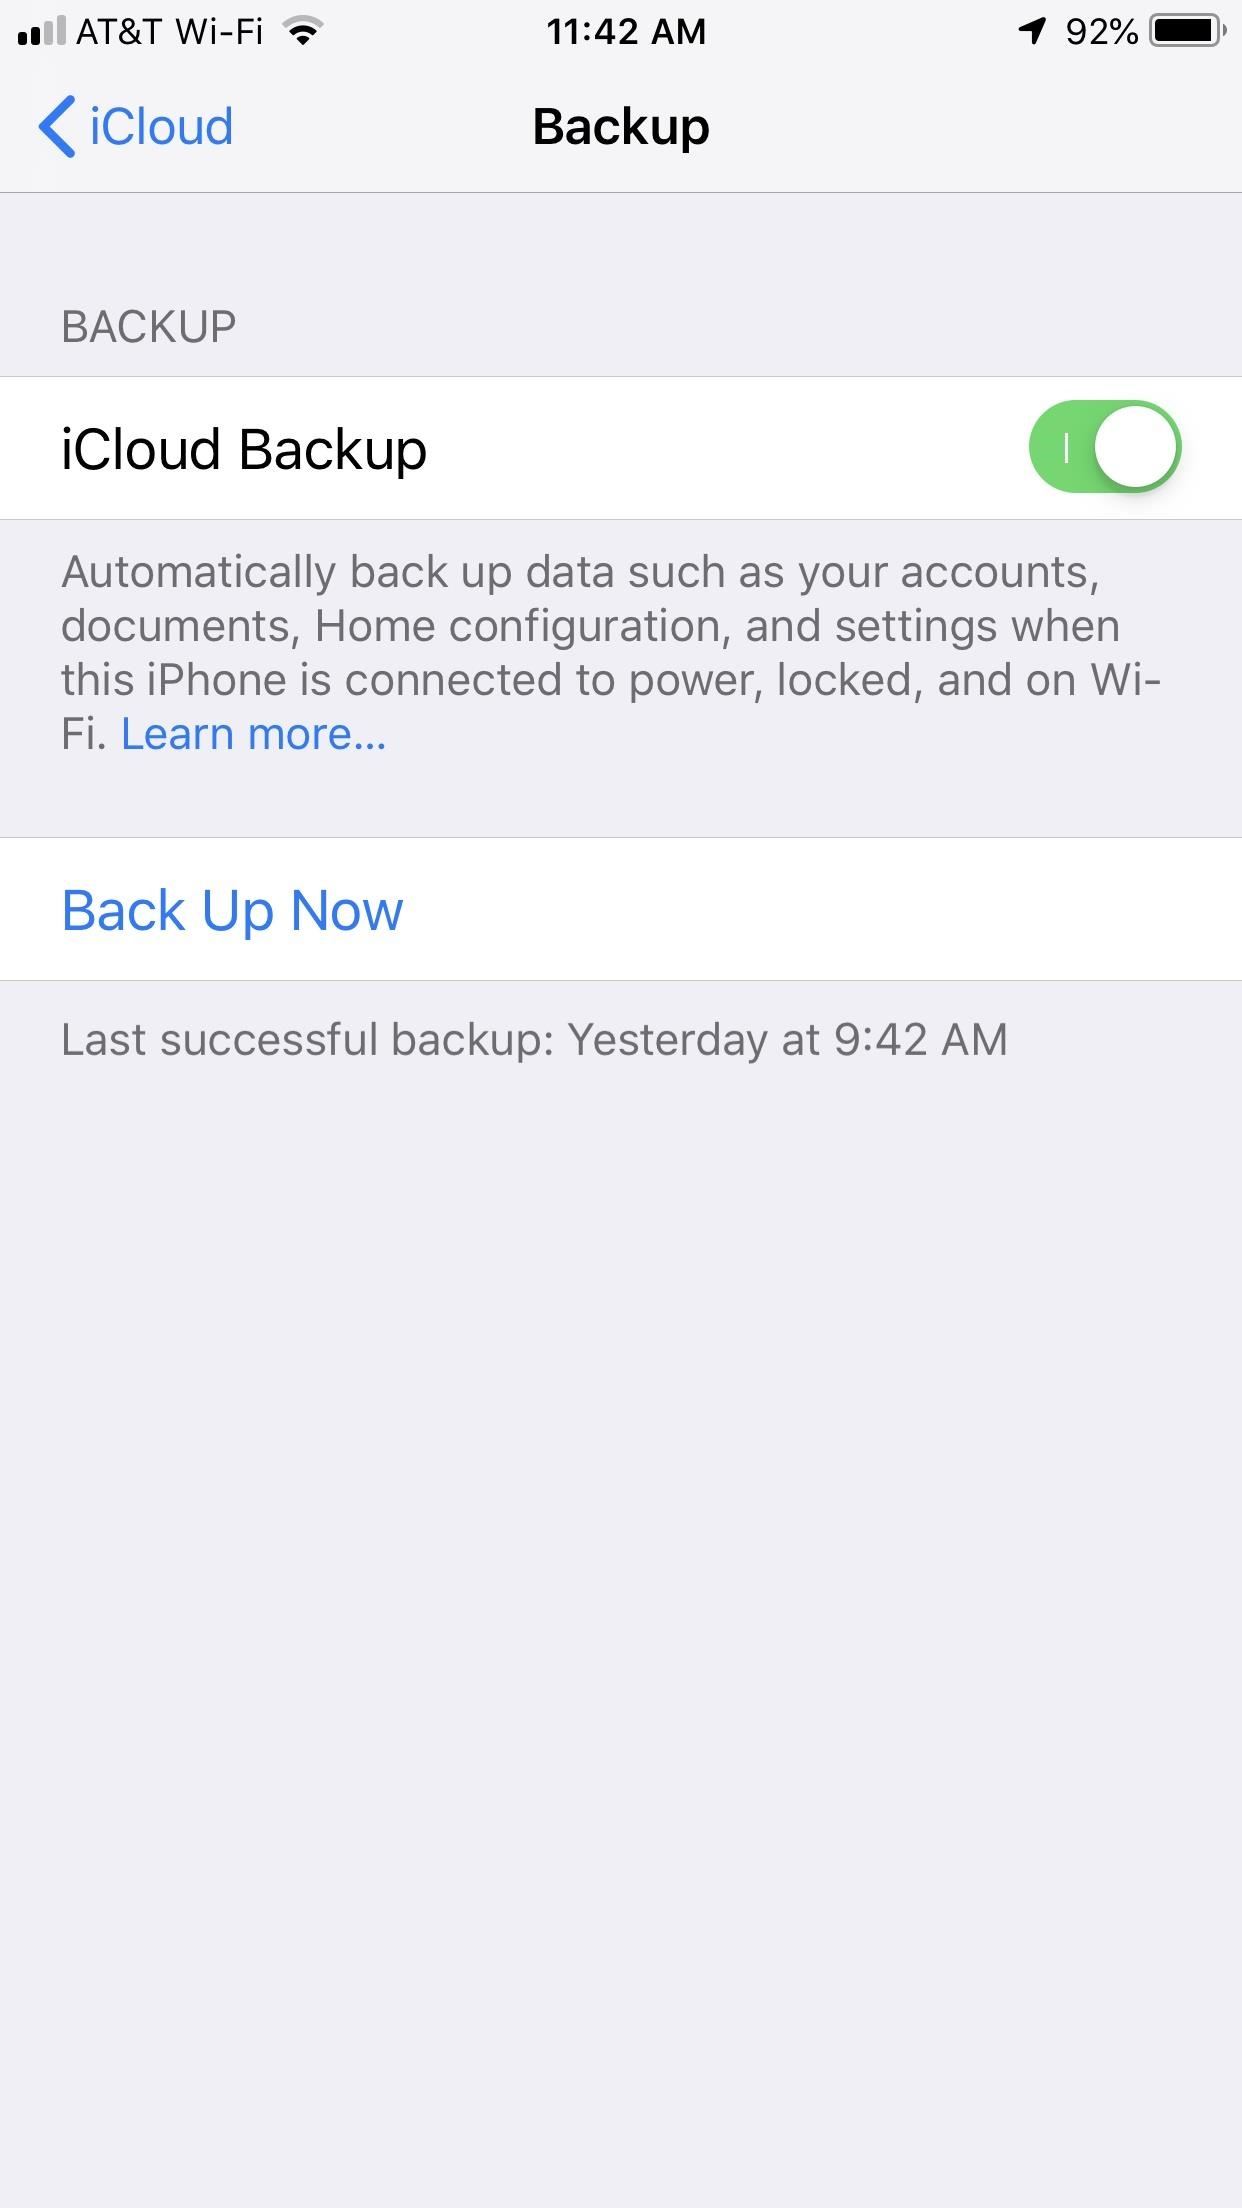 How to Securely Erase Your iPhone When Selling, Trading, Returning, or Giving It Away